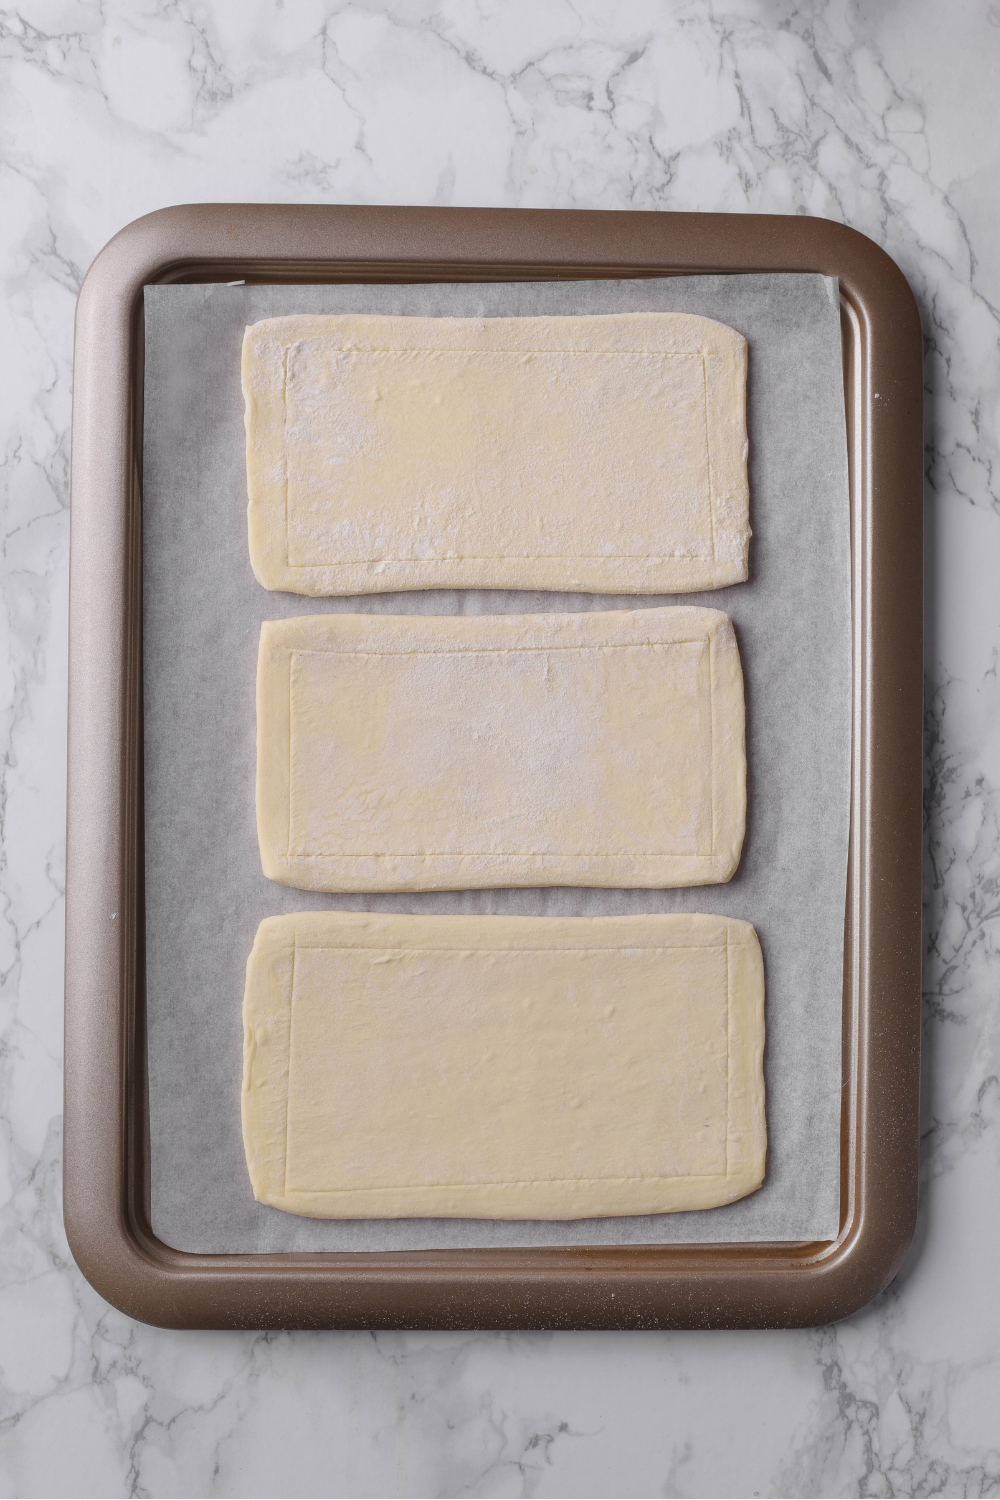 Three rolled out puff pastry sheets on a parchment paper lined baking sheet.